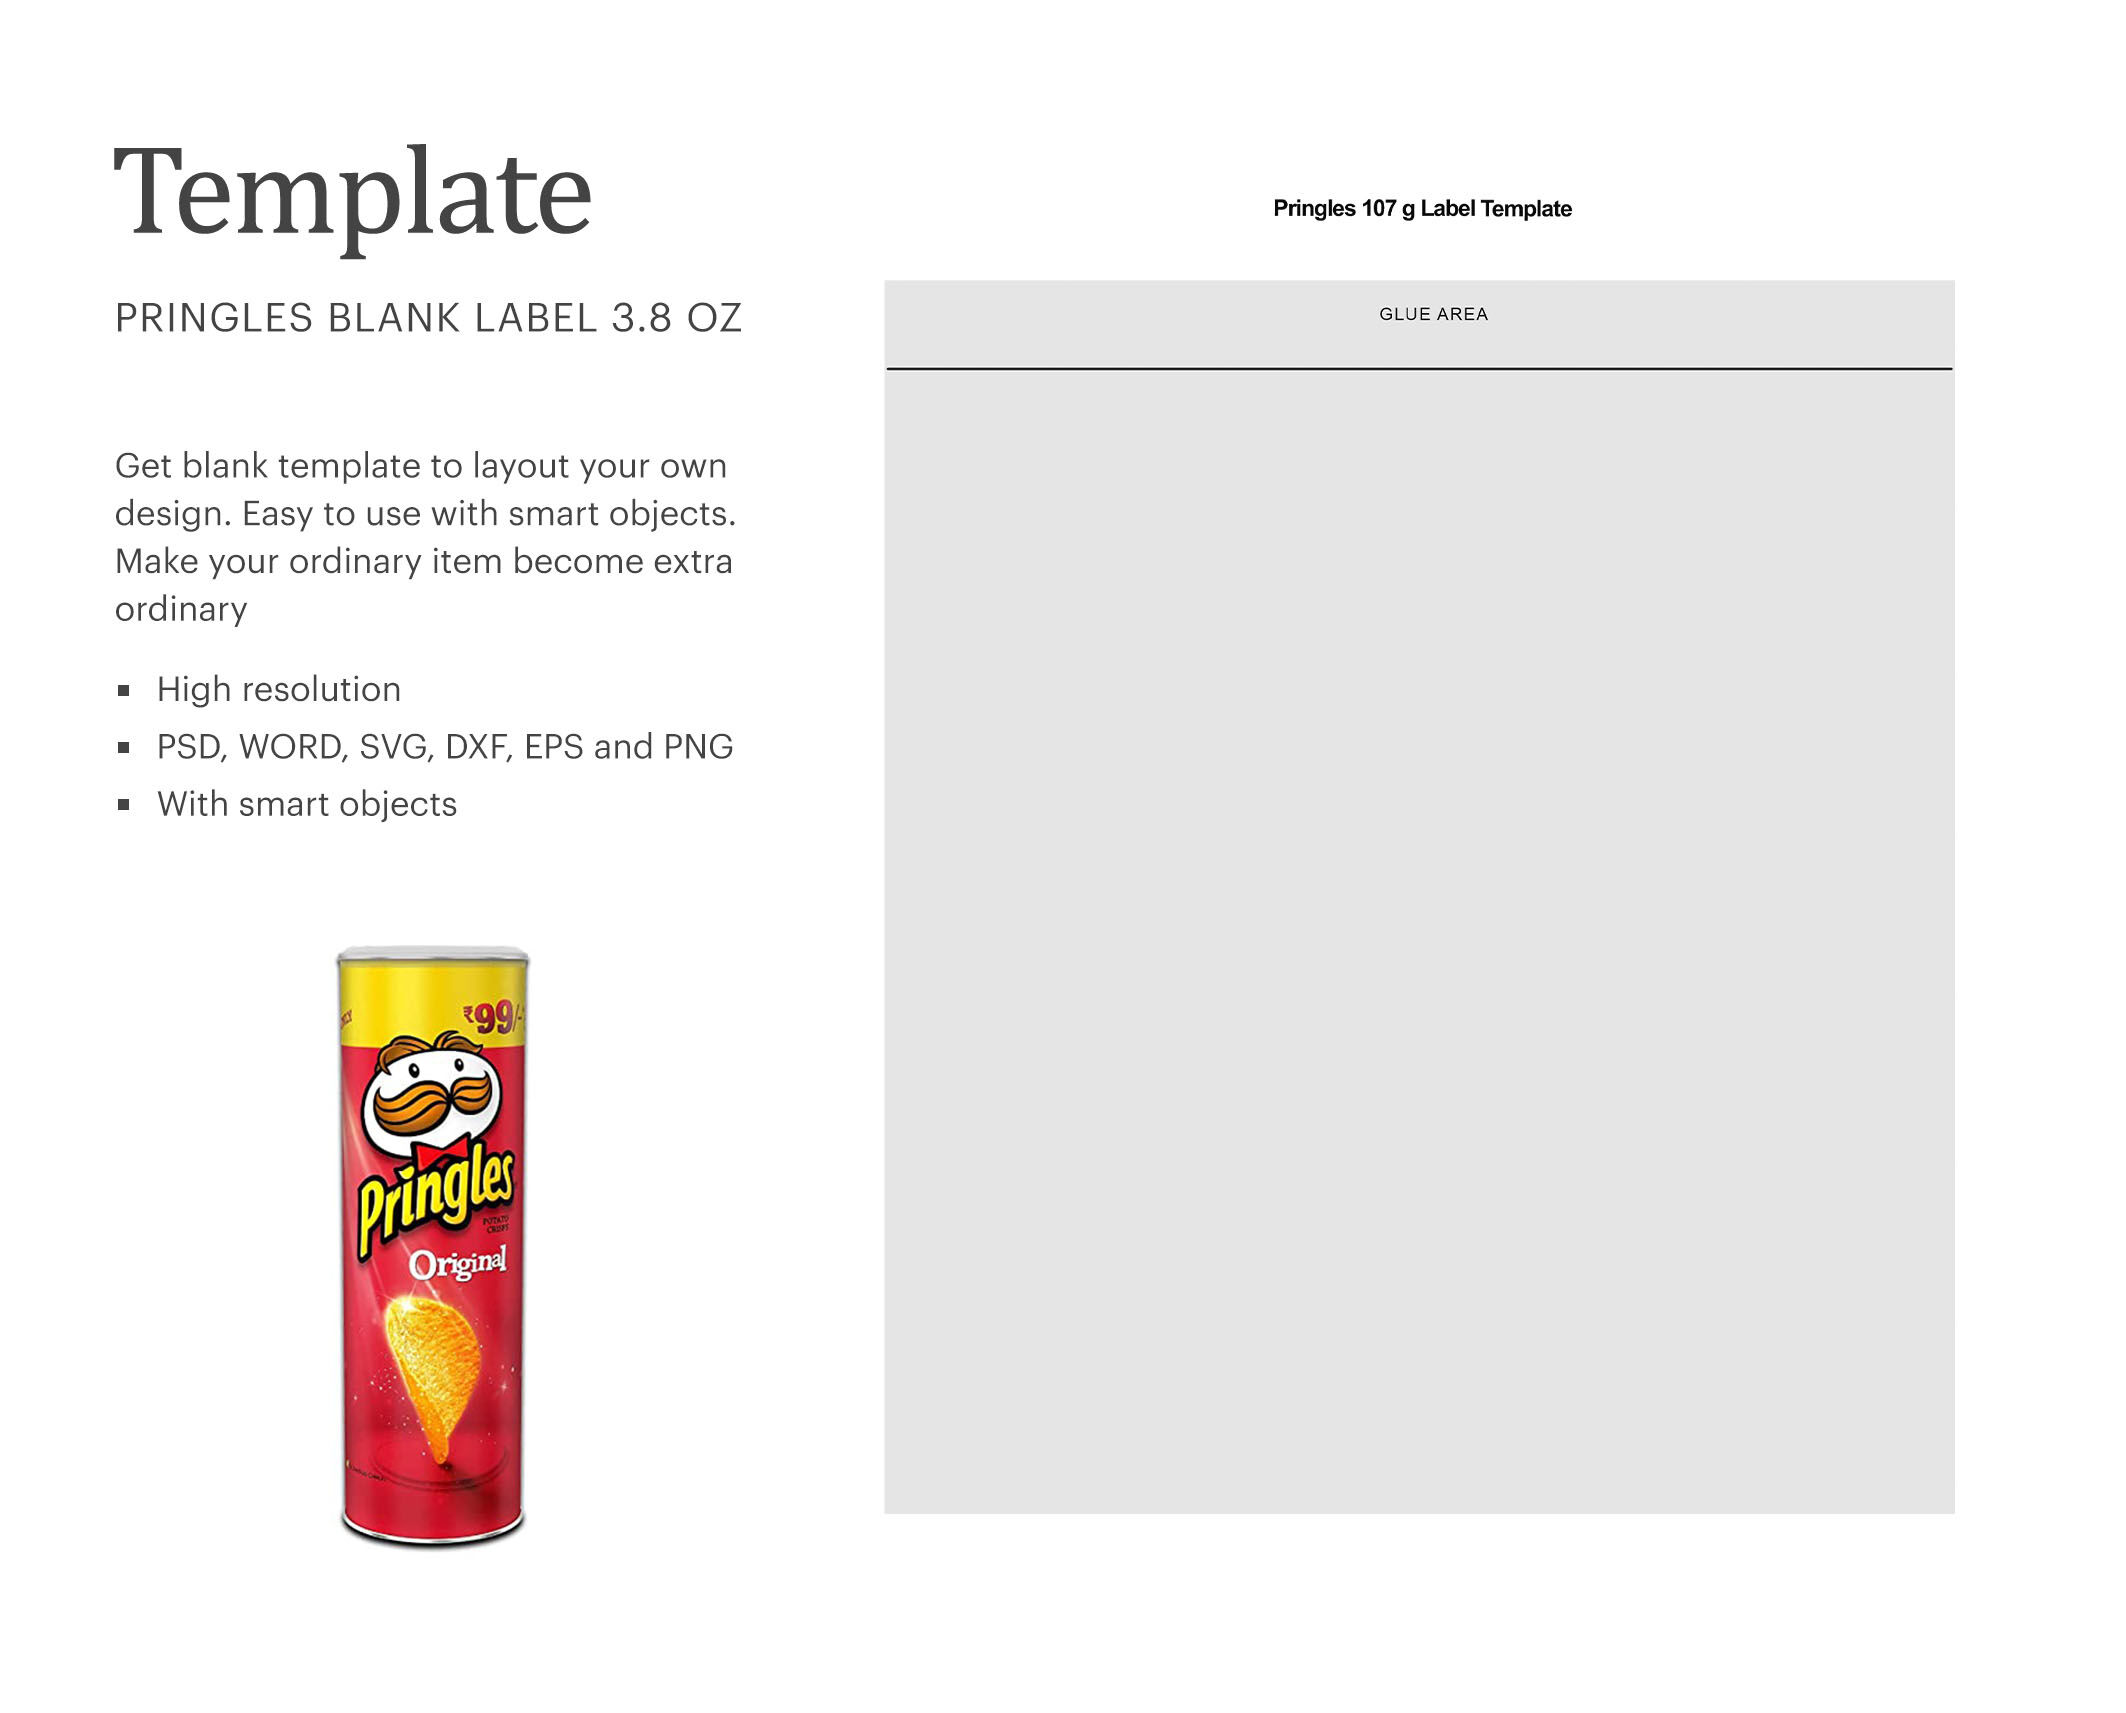 Pringles 3 8oz Can Wrapper Template Paper Size 8 5 x 11 By ariodsgn